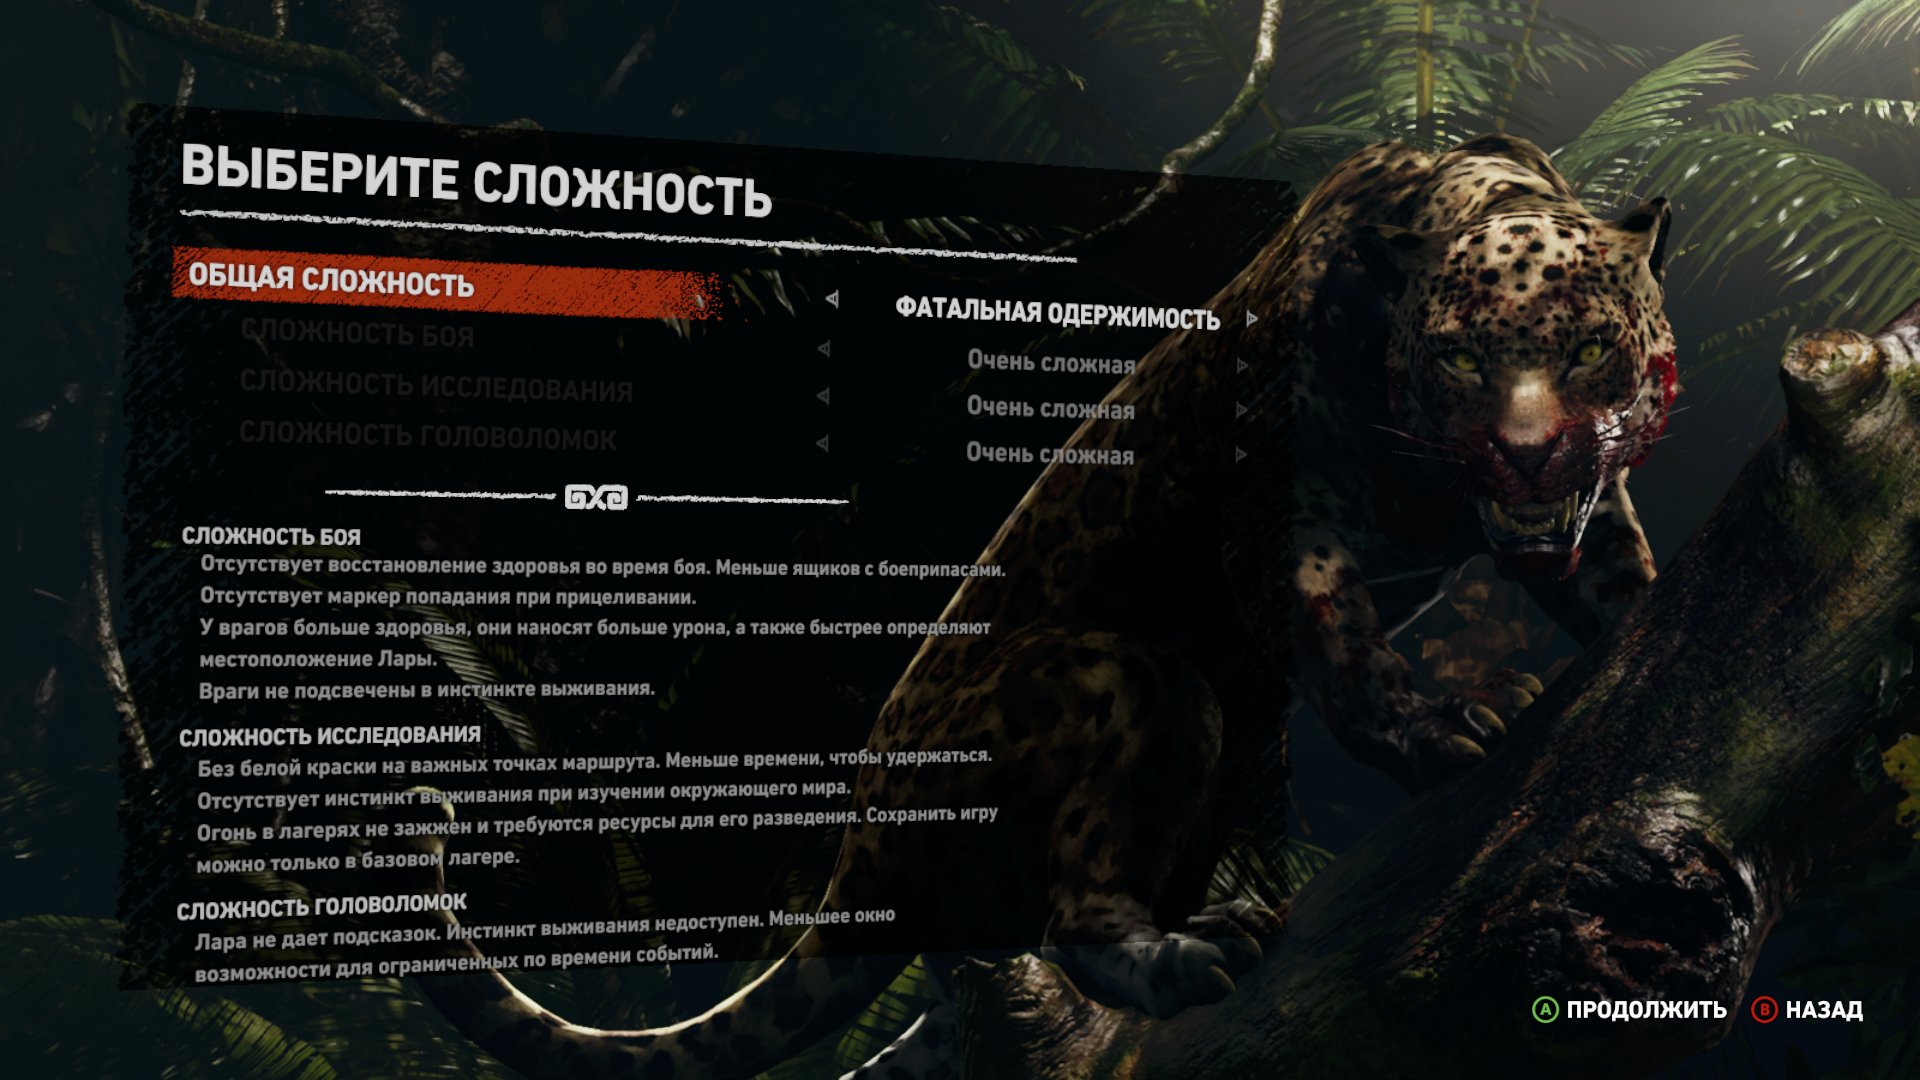 The game are difficult. Коготь орла Shadow of the Tomb Raider. Difficult difficulty. Normal difficulty. JJT N/A difficulty.